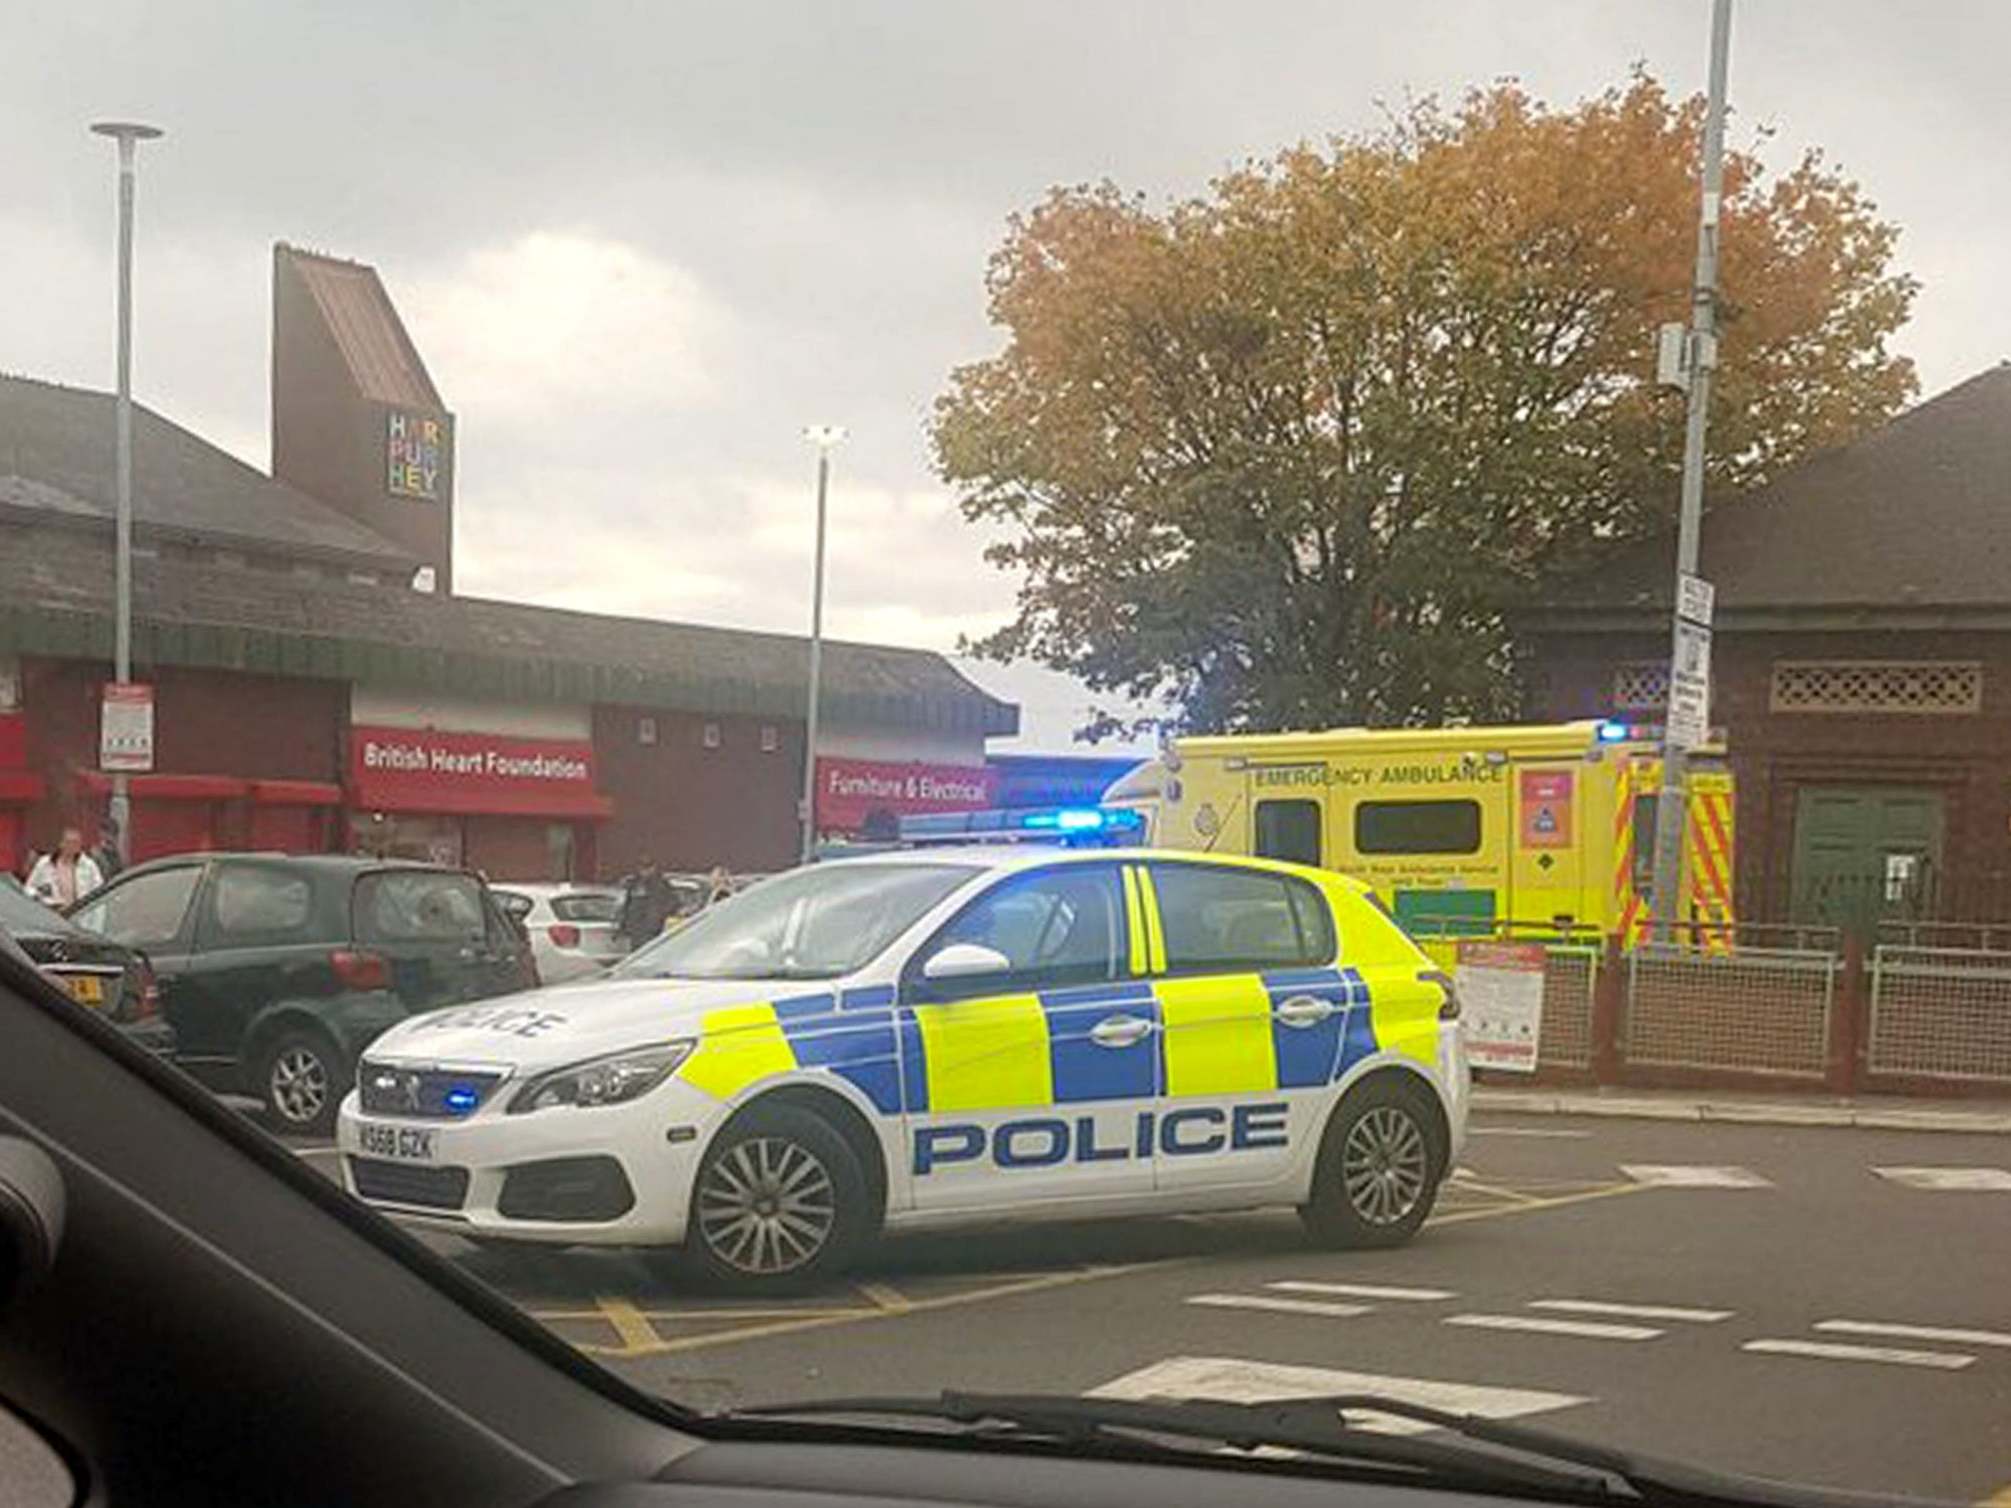 Police at the scene in Harpurhey, Manchester, after responding to reports of a stabbing at a McDonald's branch.